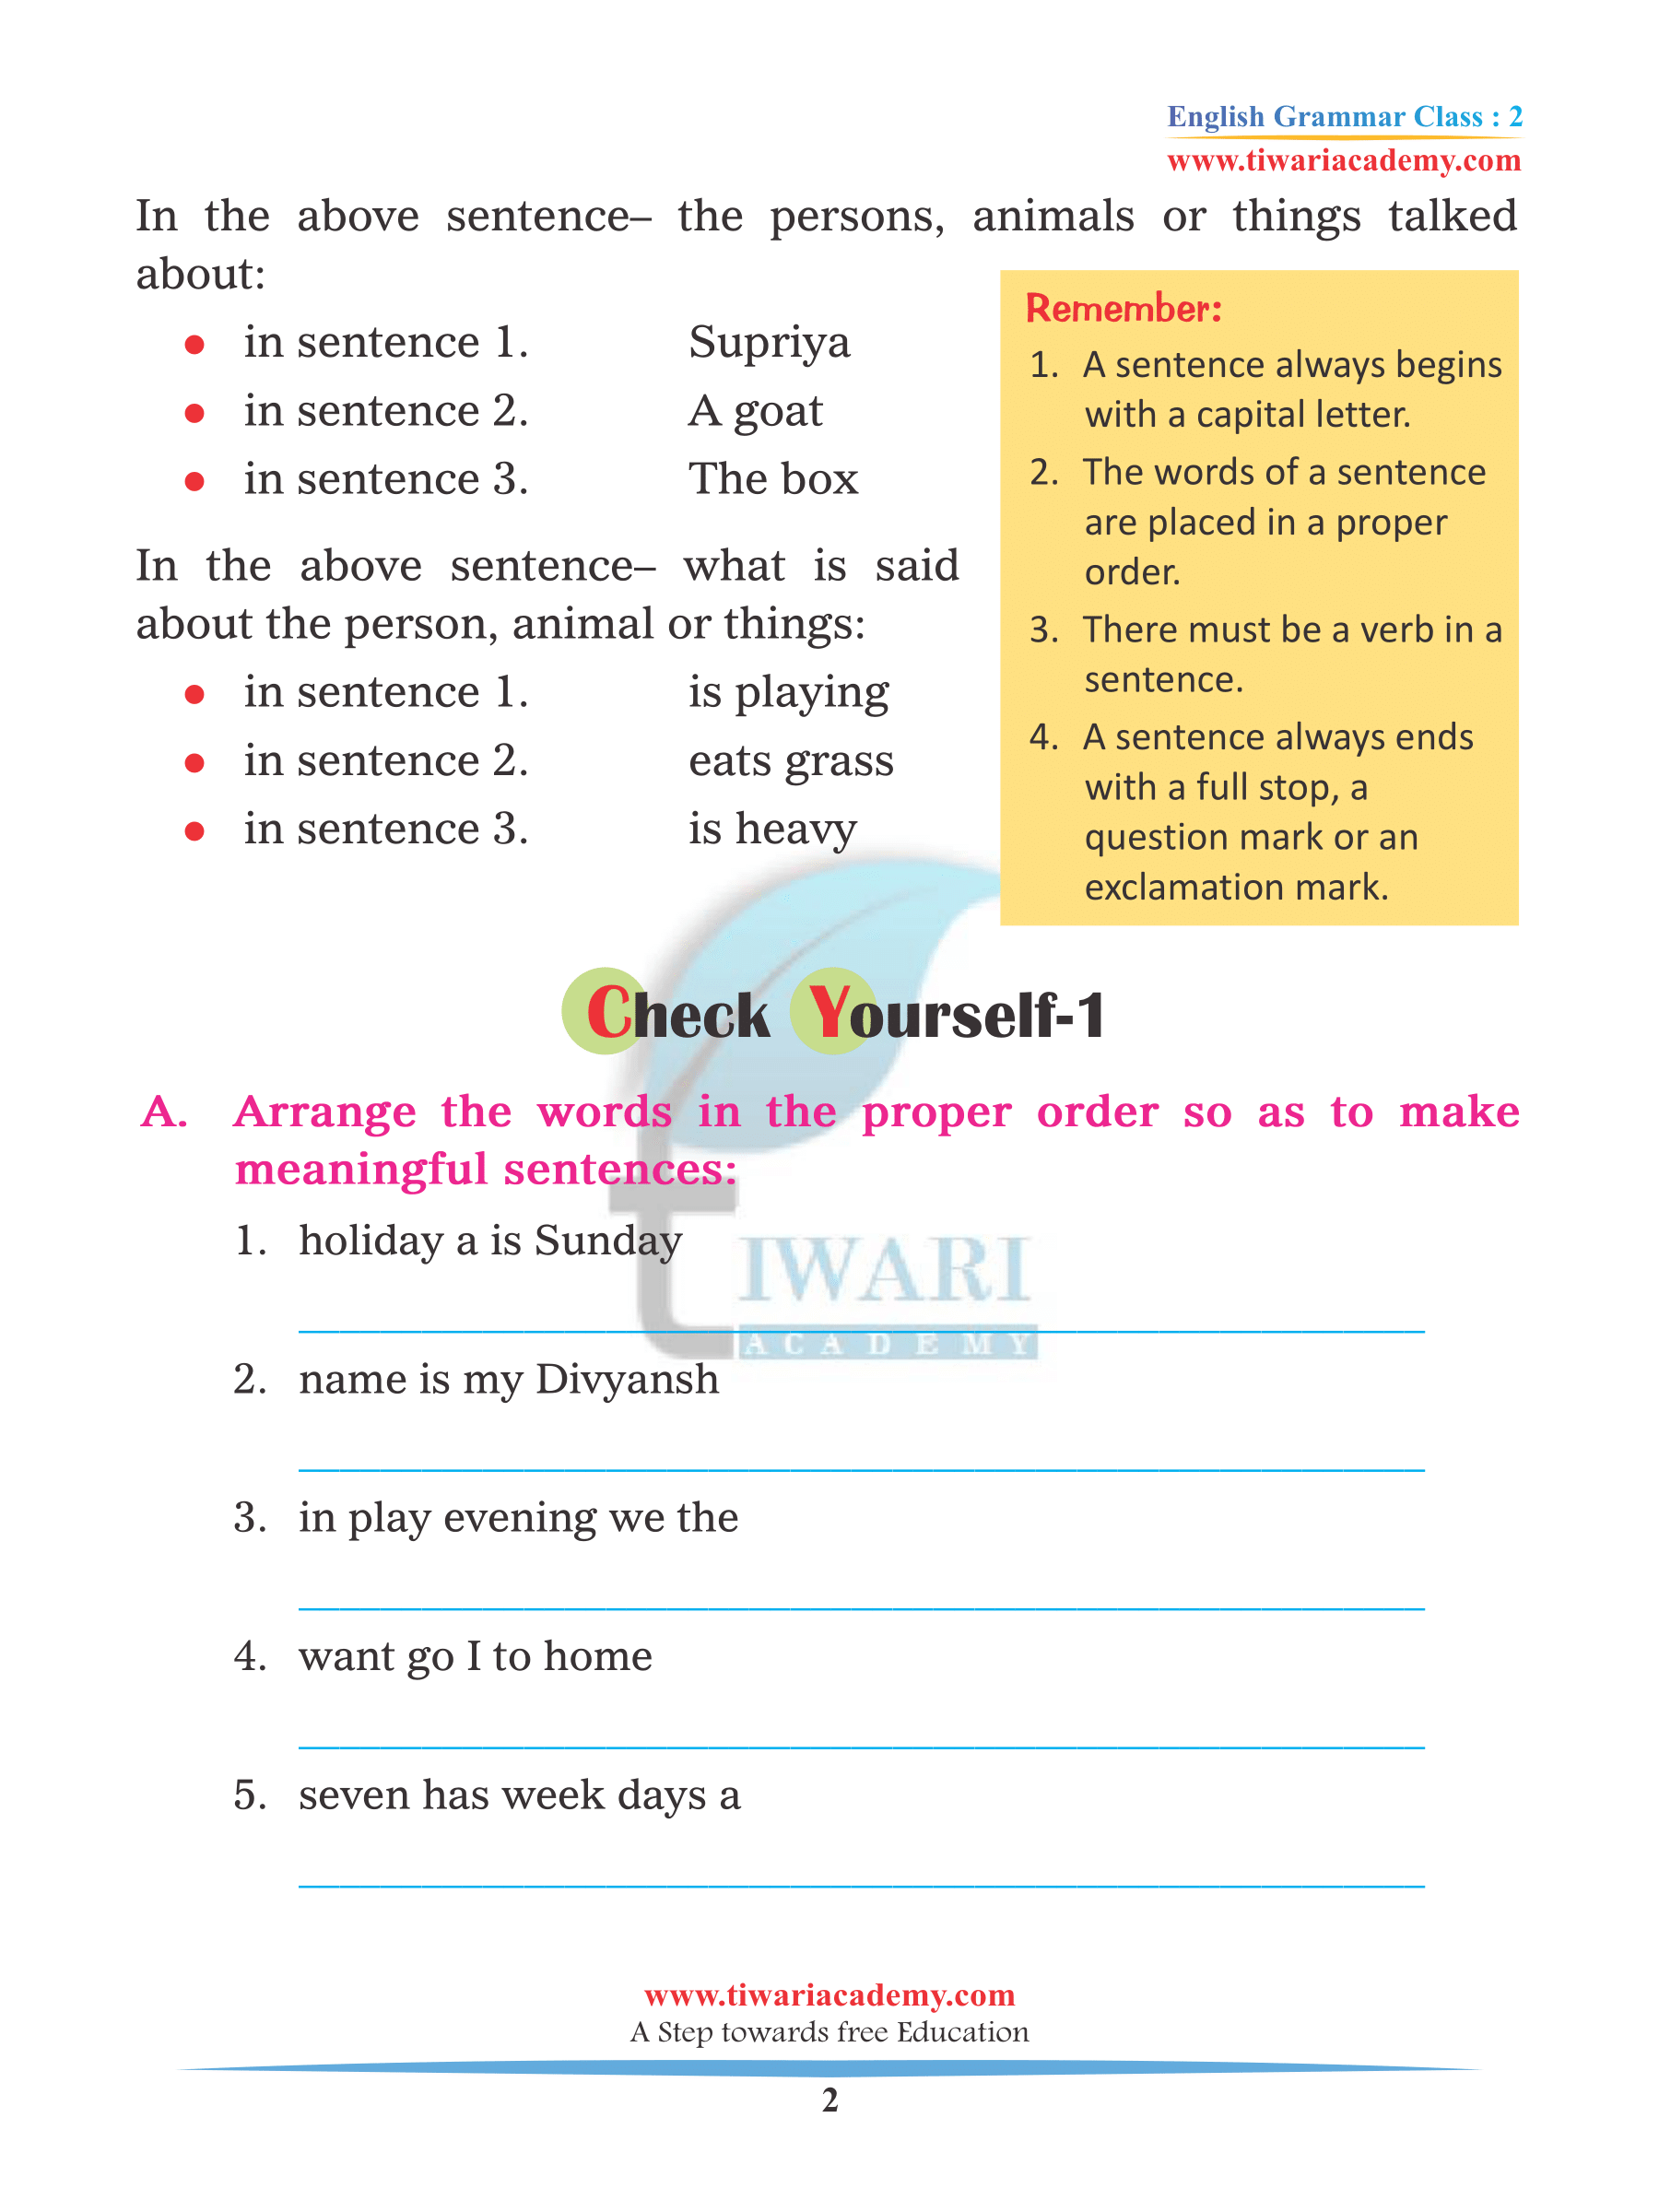 Sentence and Phrase for Class 2 English Grammar